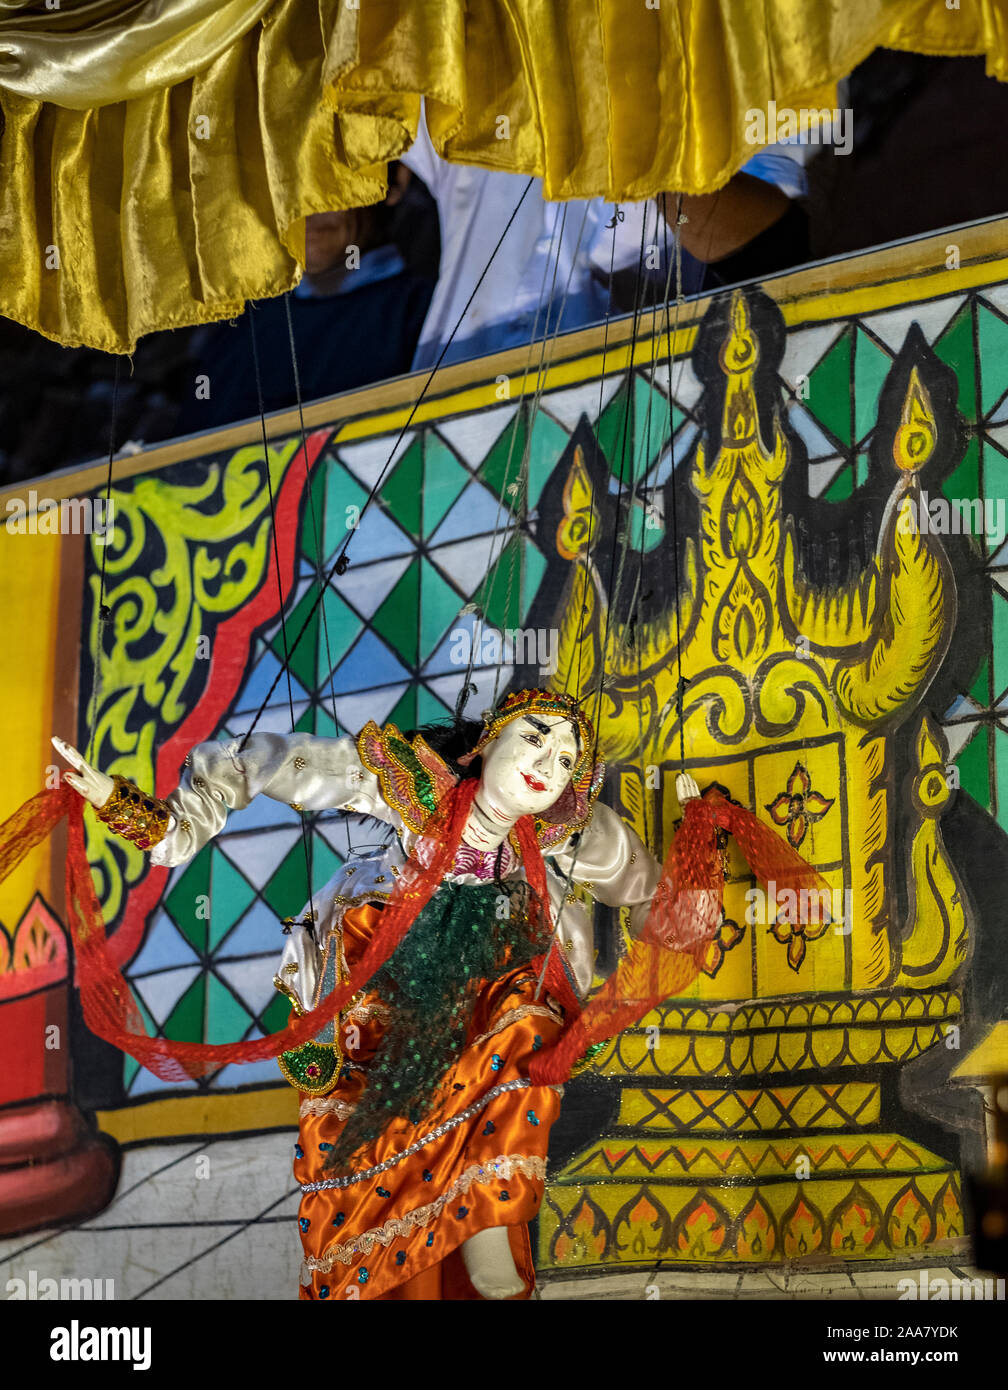 Colorful puppet theater with puppets representing Buddhist allegories and performed by experienced puppeteers behind a curtain in Bagan, Myanmar/Burma Stock Photo